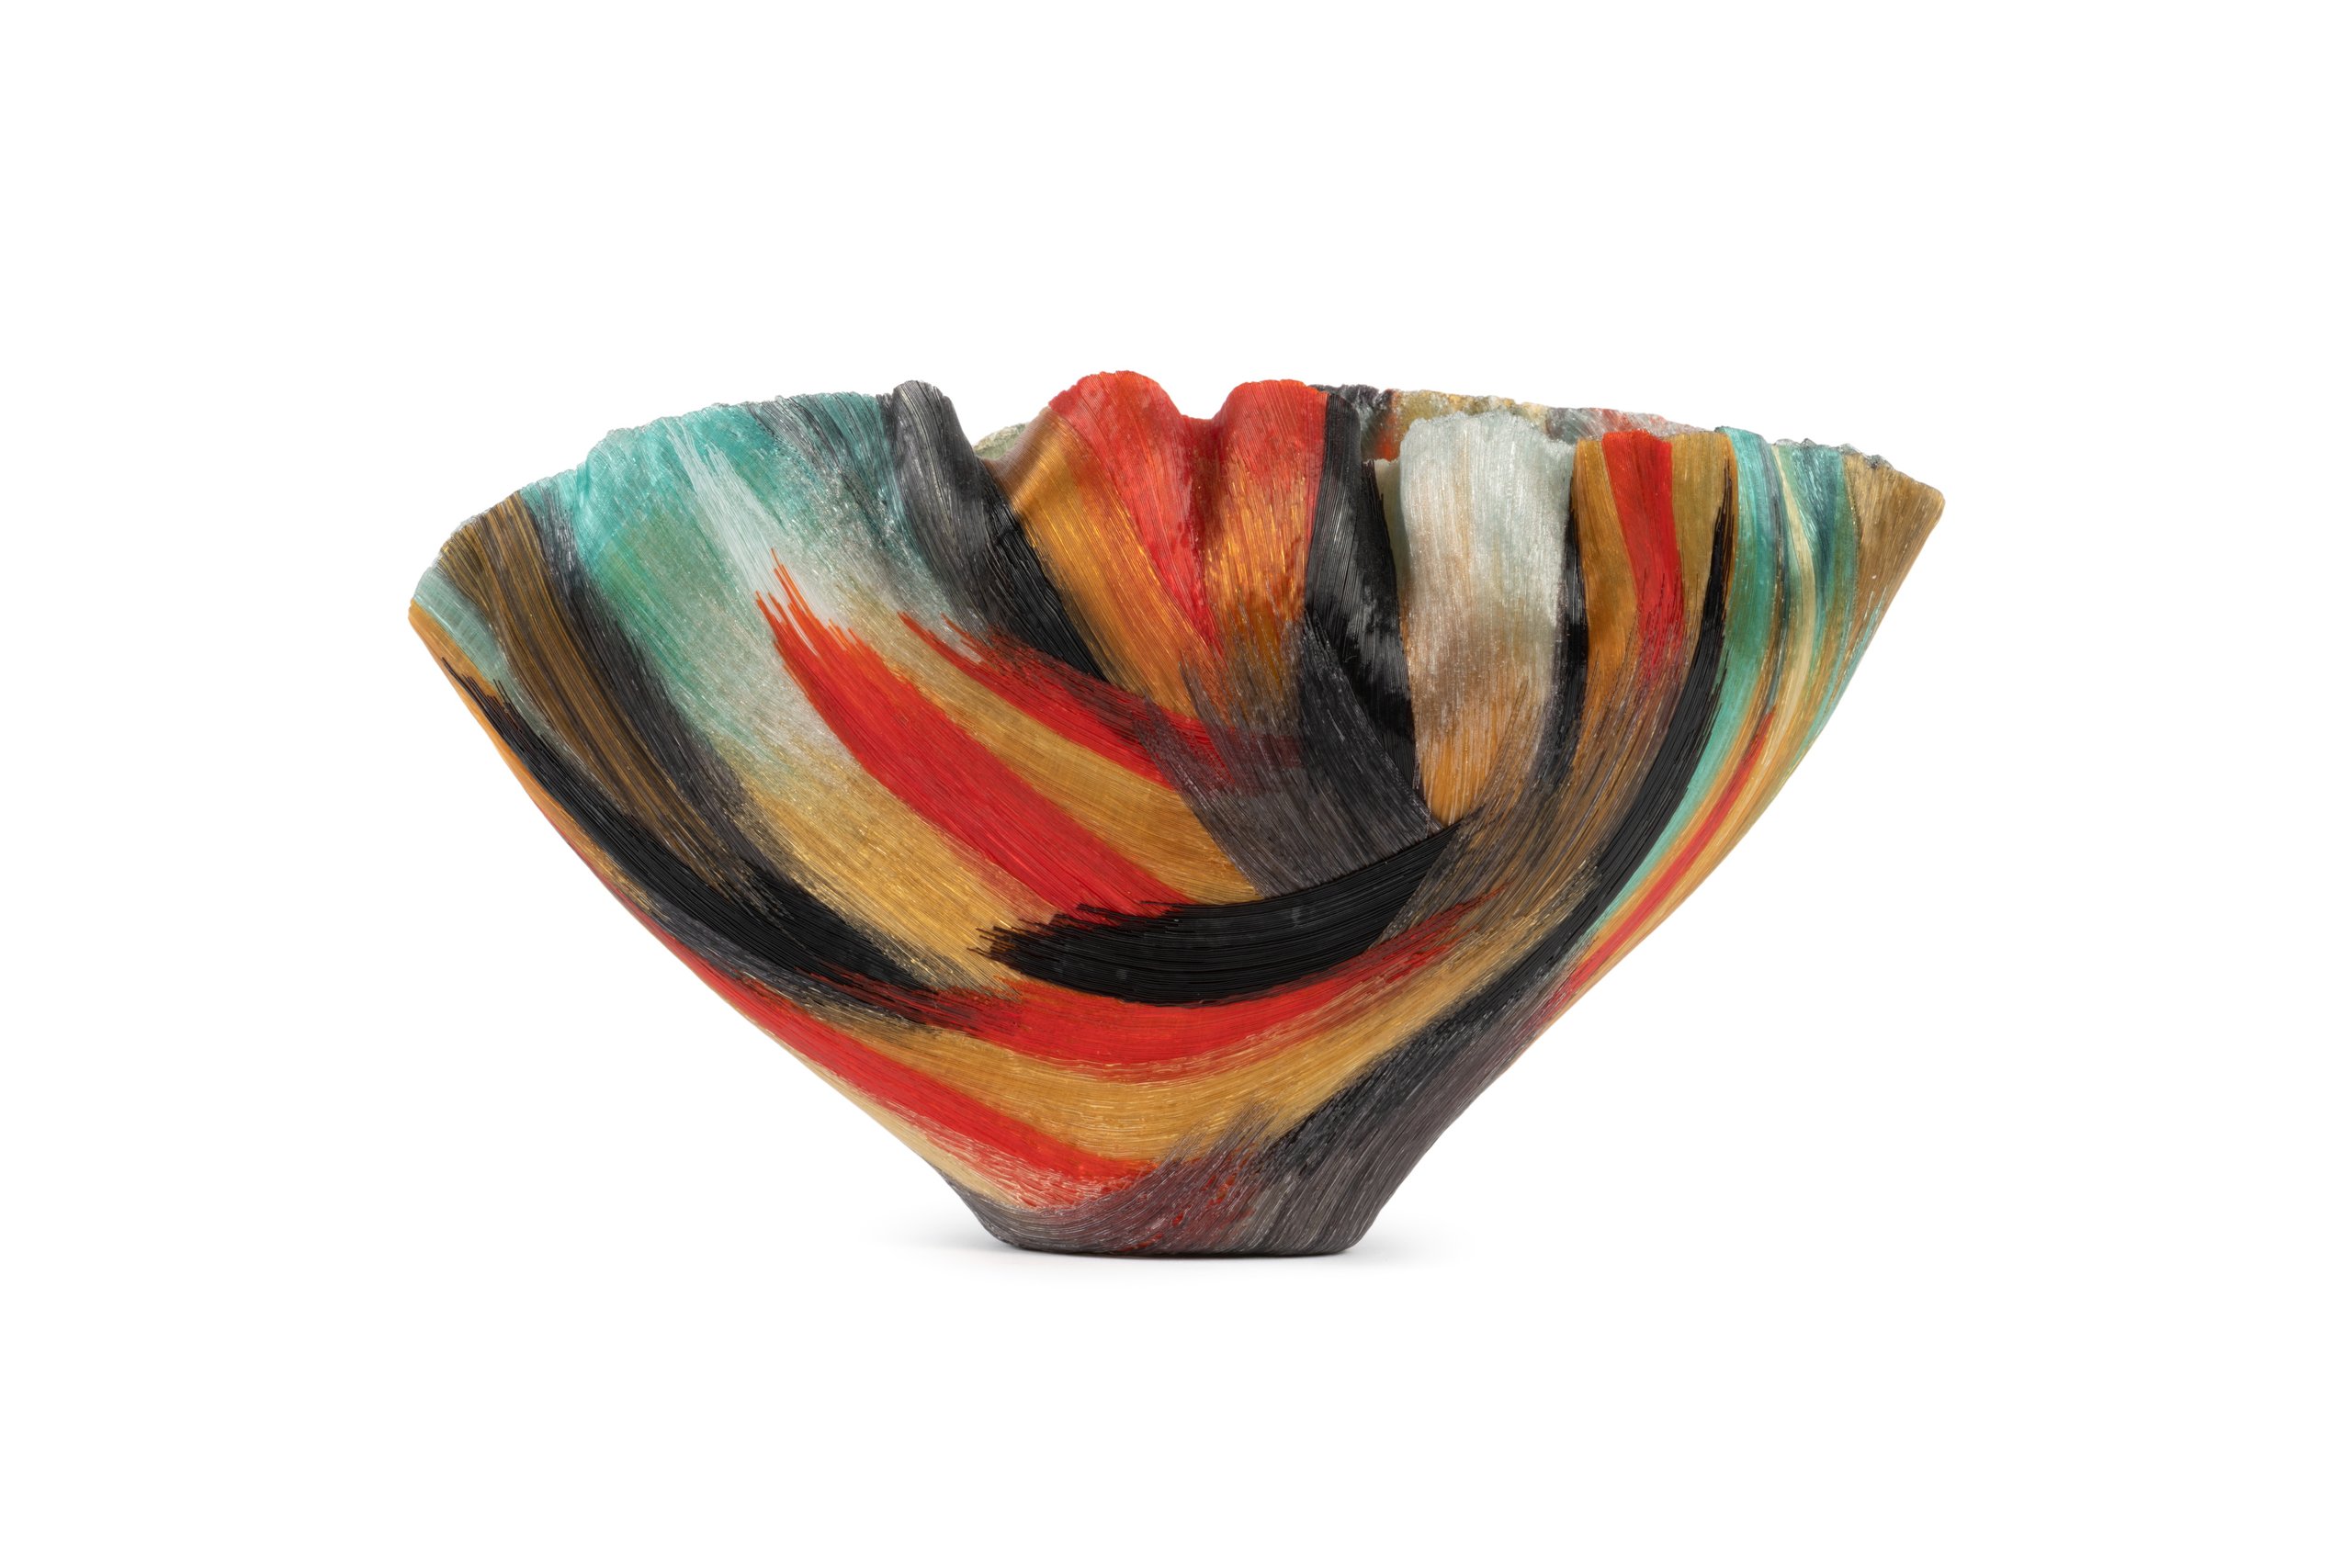 'Devilish chaos' bowl by Toots Zynsky